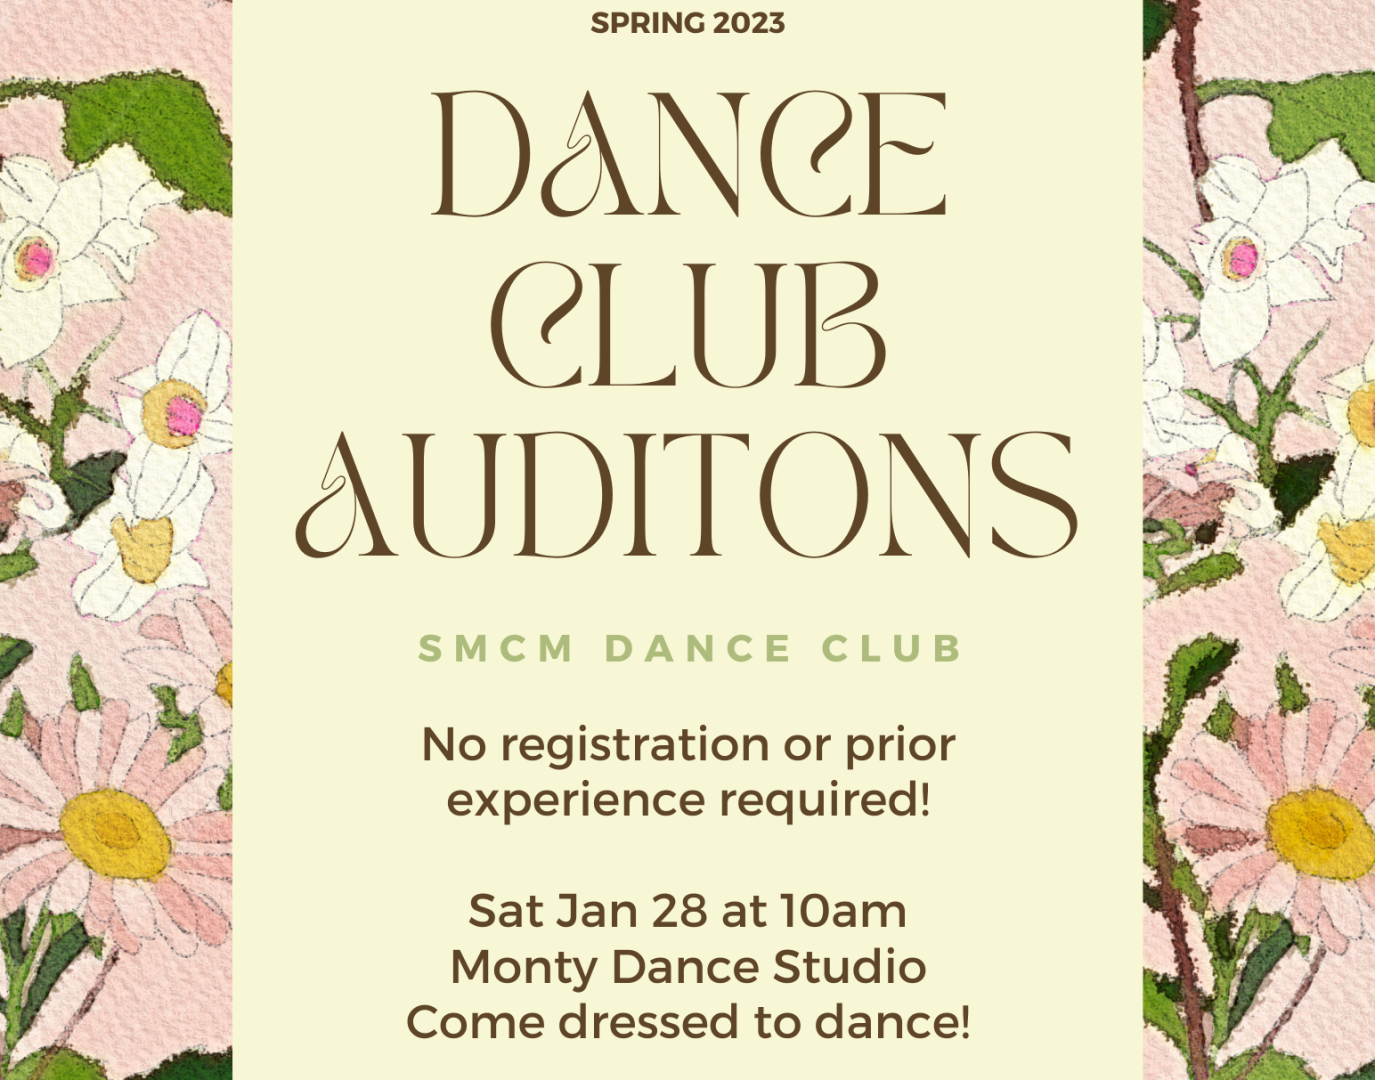 Flyer reading "Dance Club Auditions" with information about when and where auditions will be happening: Jan 28th at 10am in the Monty Hall Dance Studio